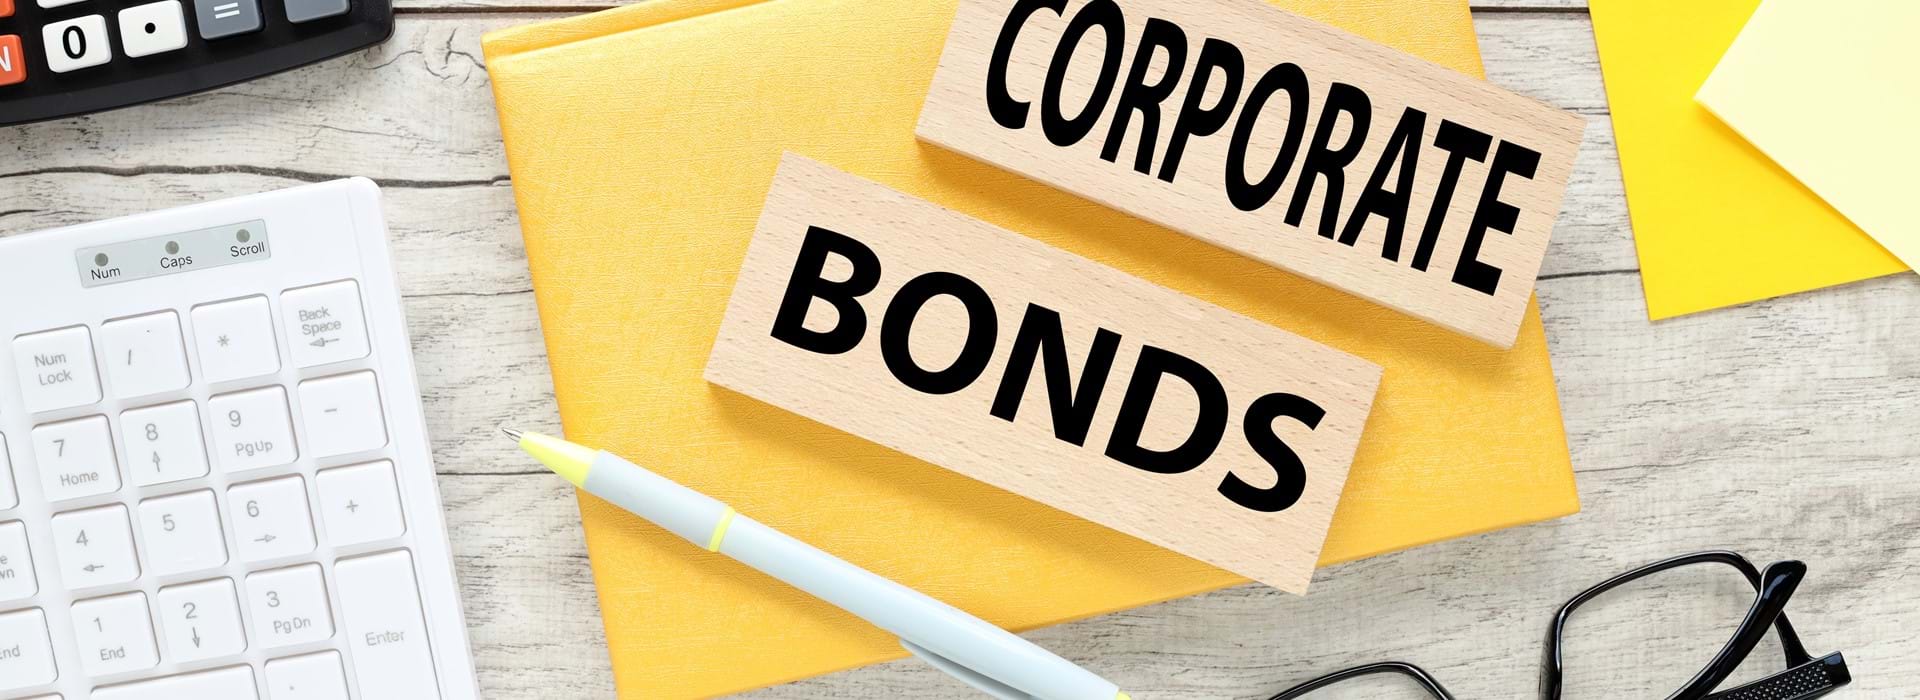 Corporate bonds in the new world